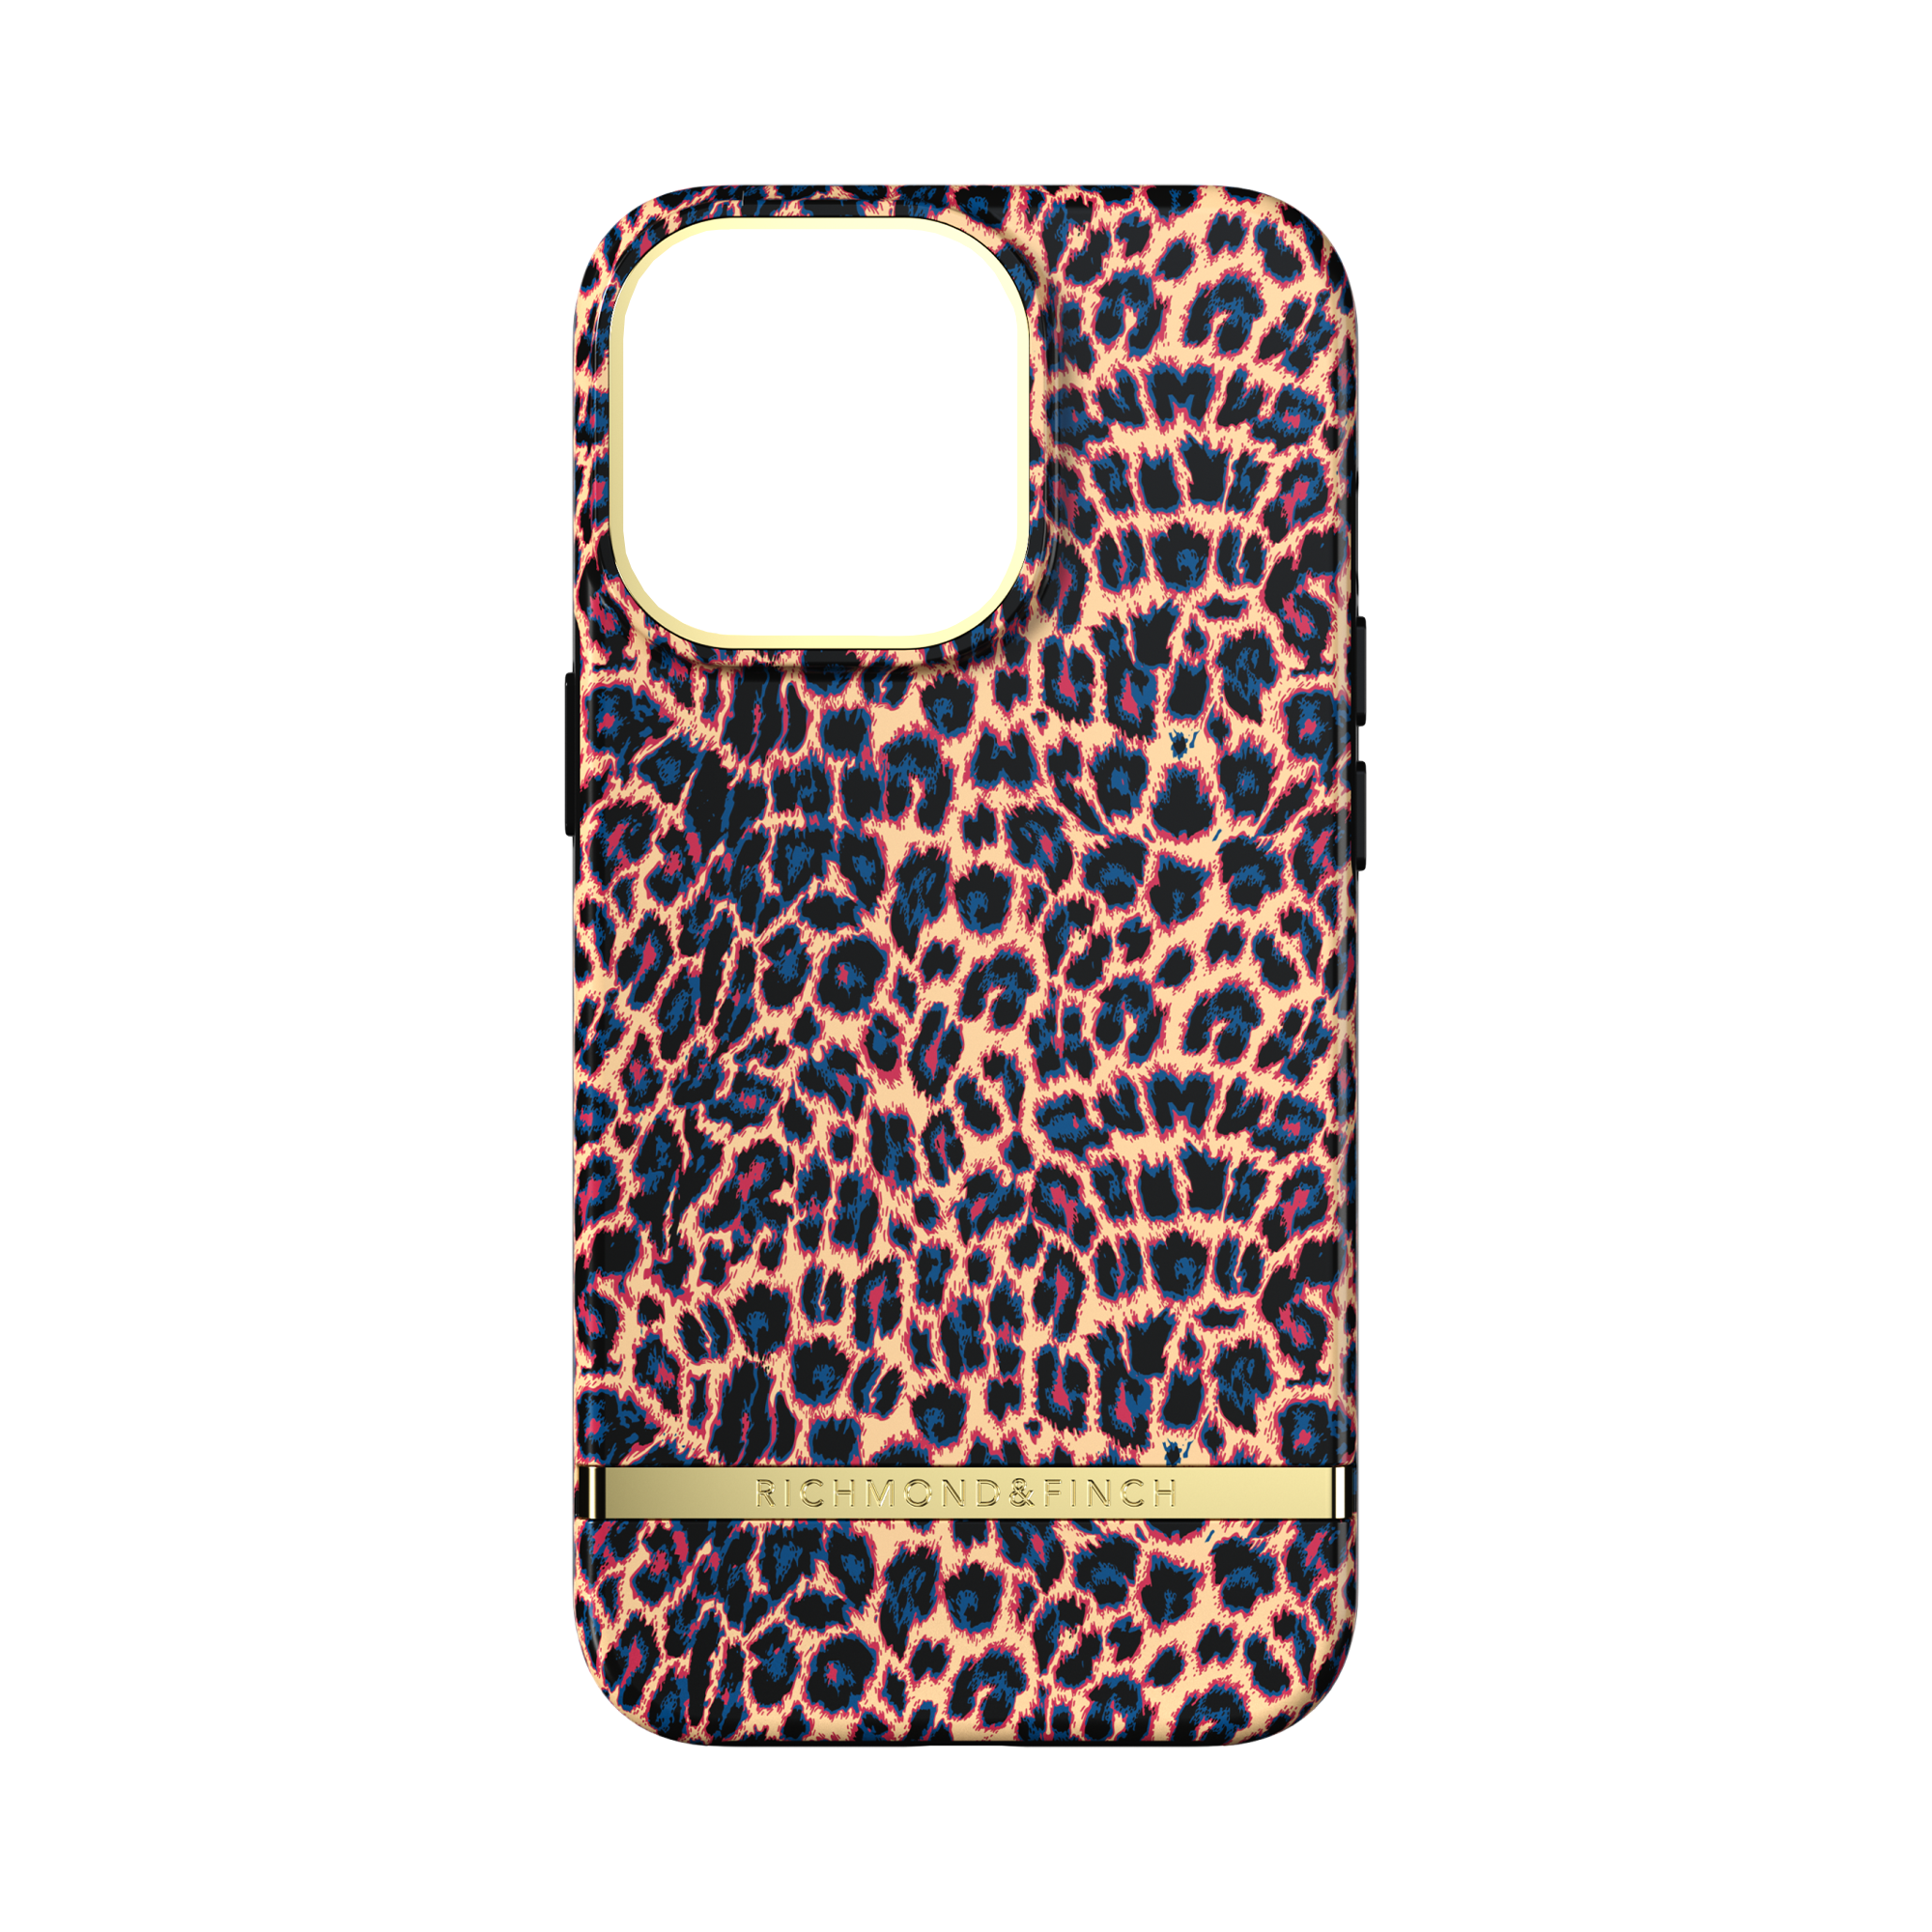 Apple, iPhone iPhone mehrfarbig Tasche Leopard, 13 FINCH & Apricot Pro, RICHMOND Backcover,